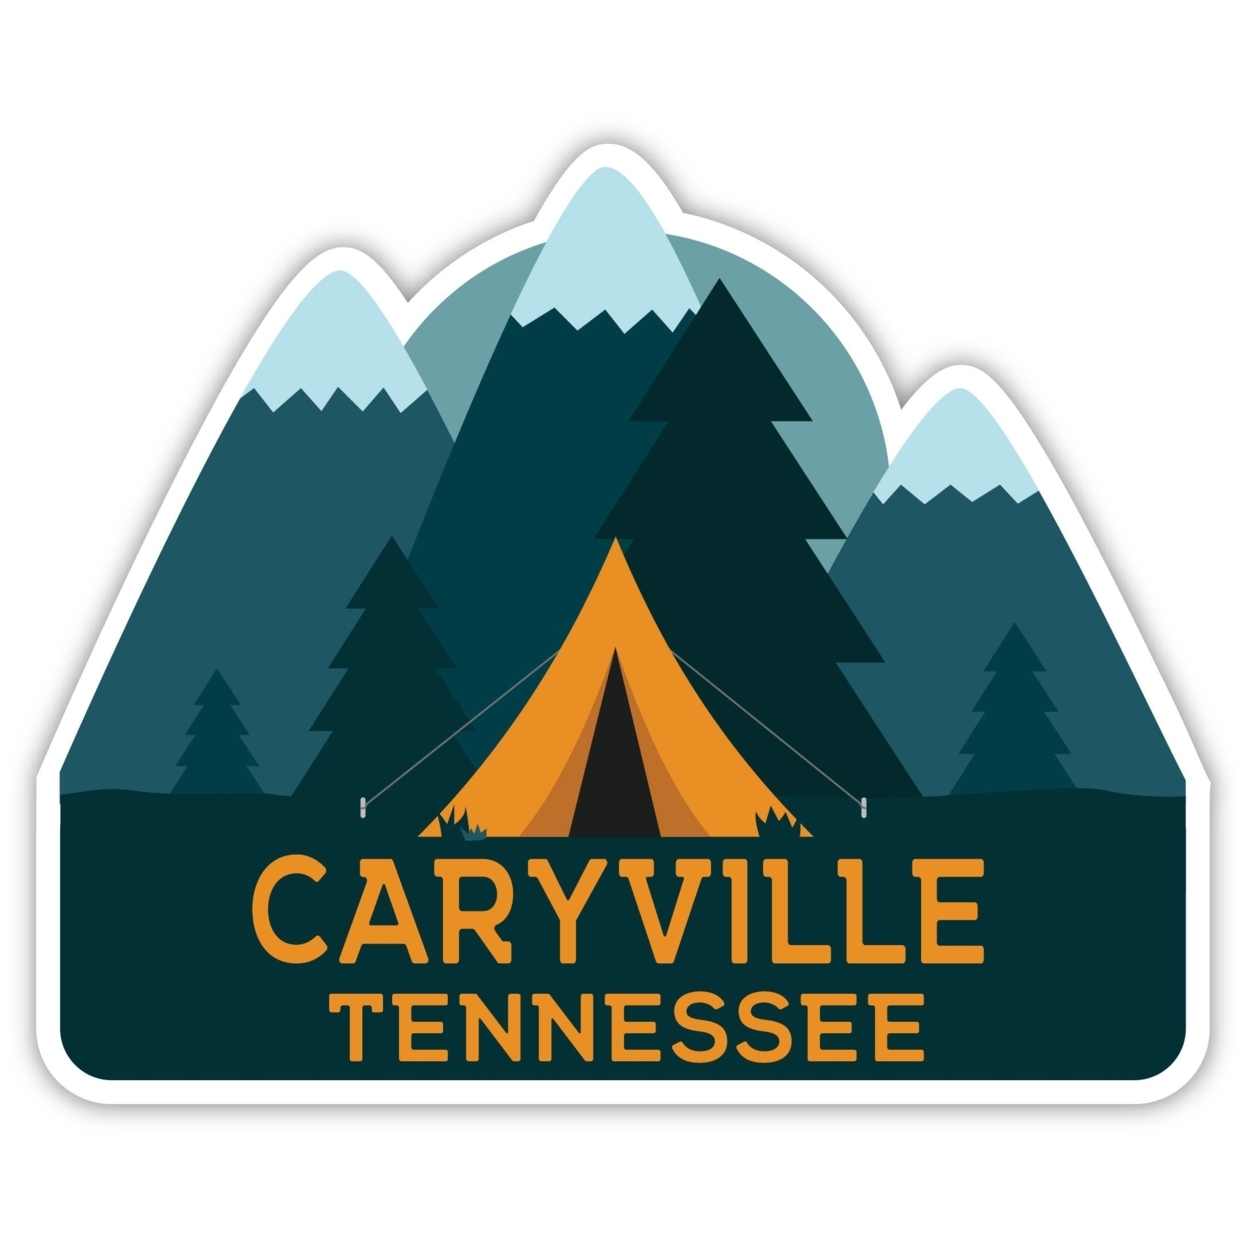 Caryville Tennessee Souvenir Decorative Stickers (Choose Theme And Size) - Single Unit, 10-Inch, Bear